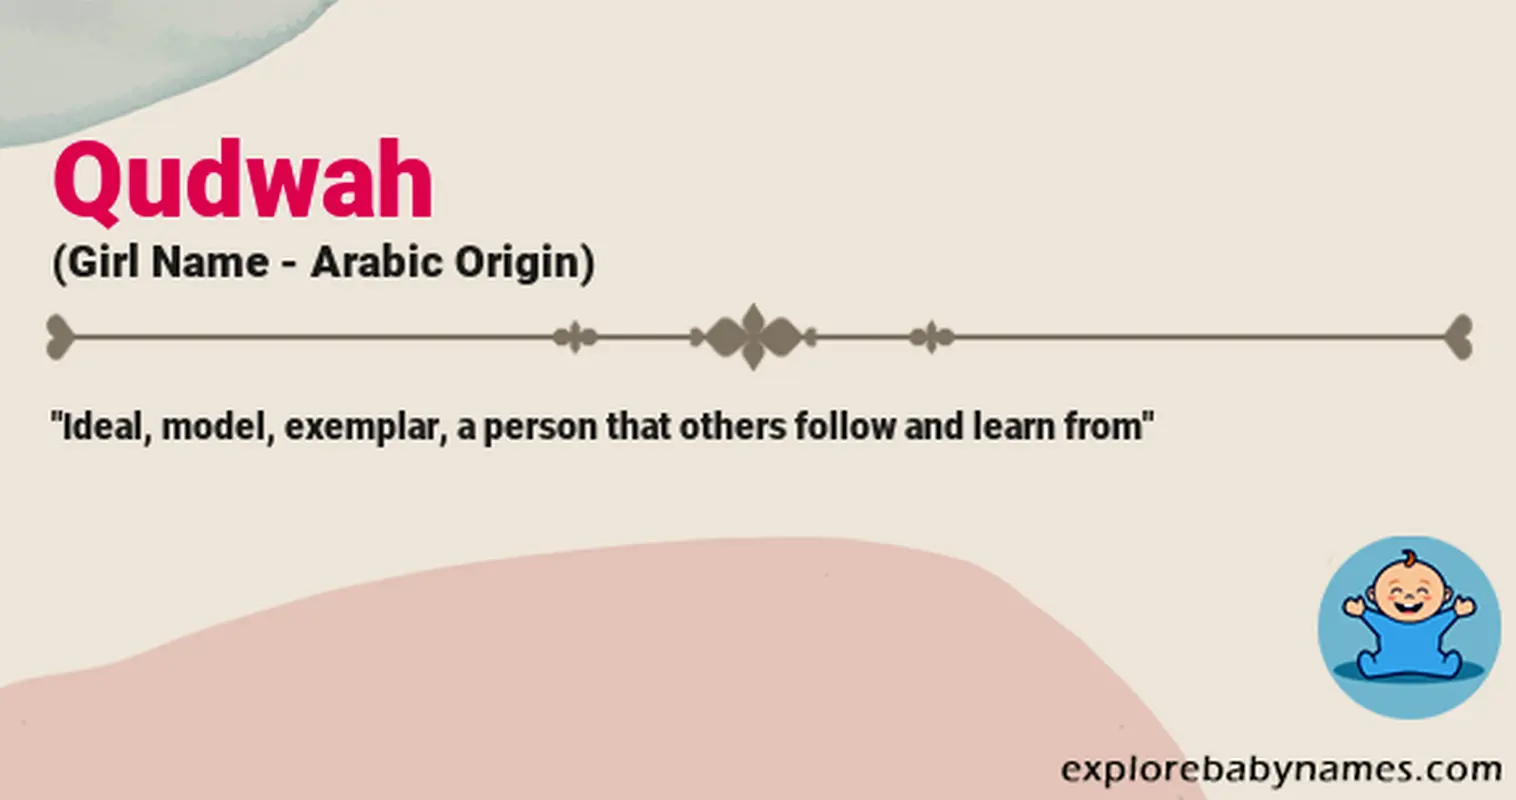 Meaning of Qudwah